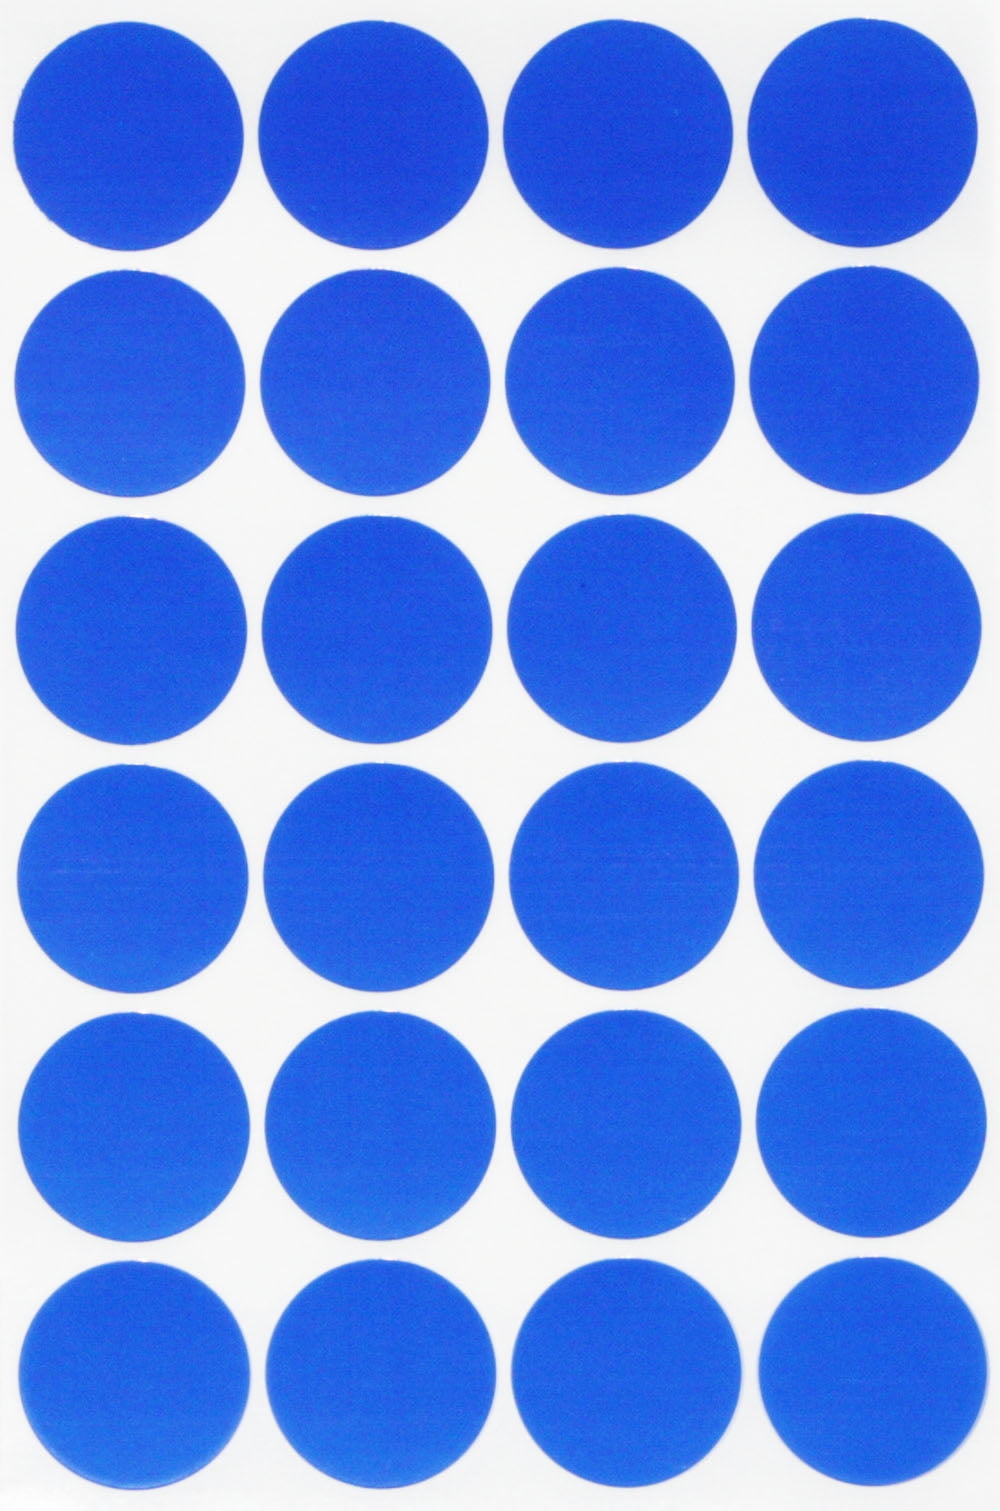 1000 COLOURED STICKERS 25MM DIA ROYAL BLUE ROUND STICKY SELF ADHESIVE LABELS 